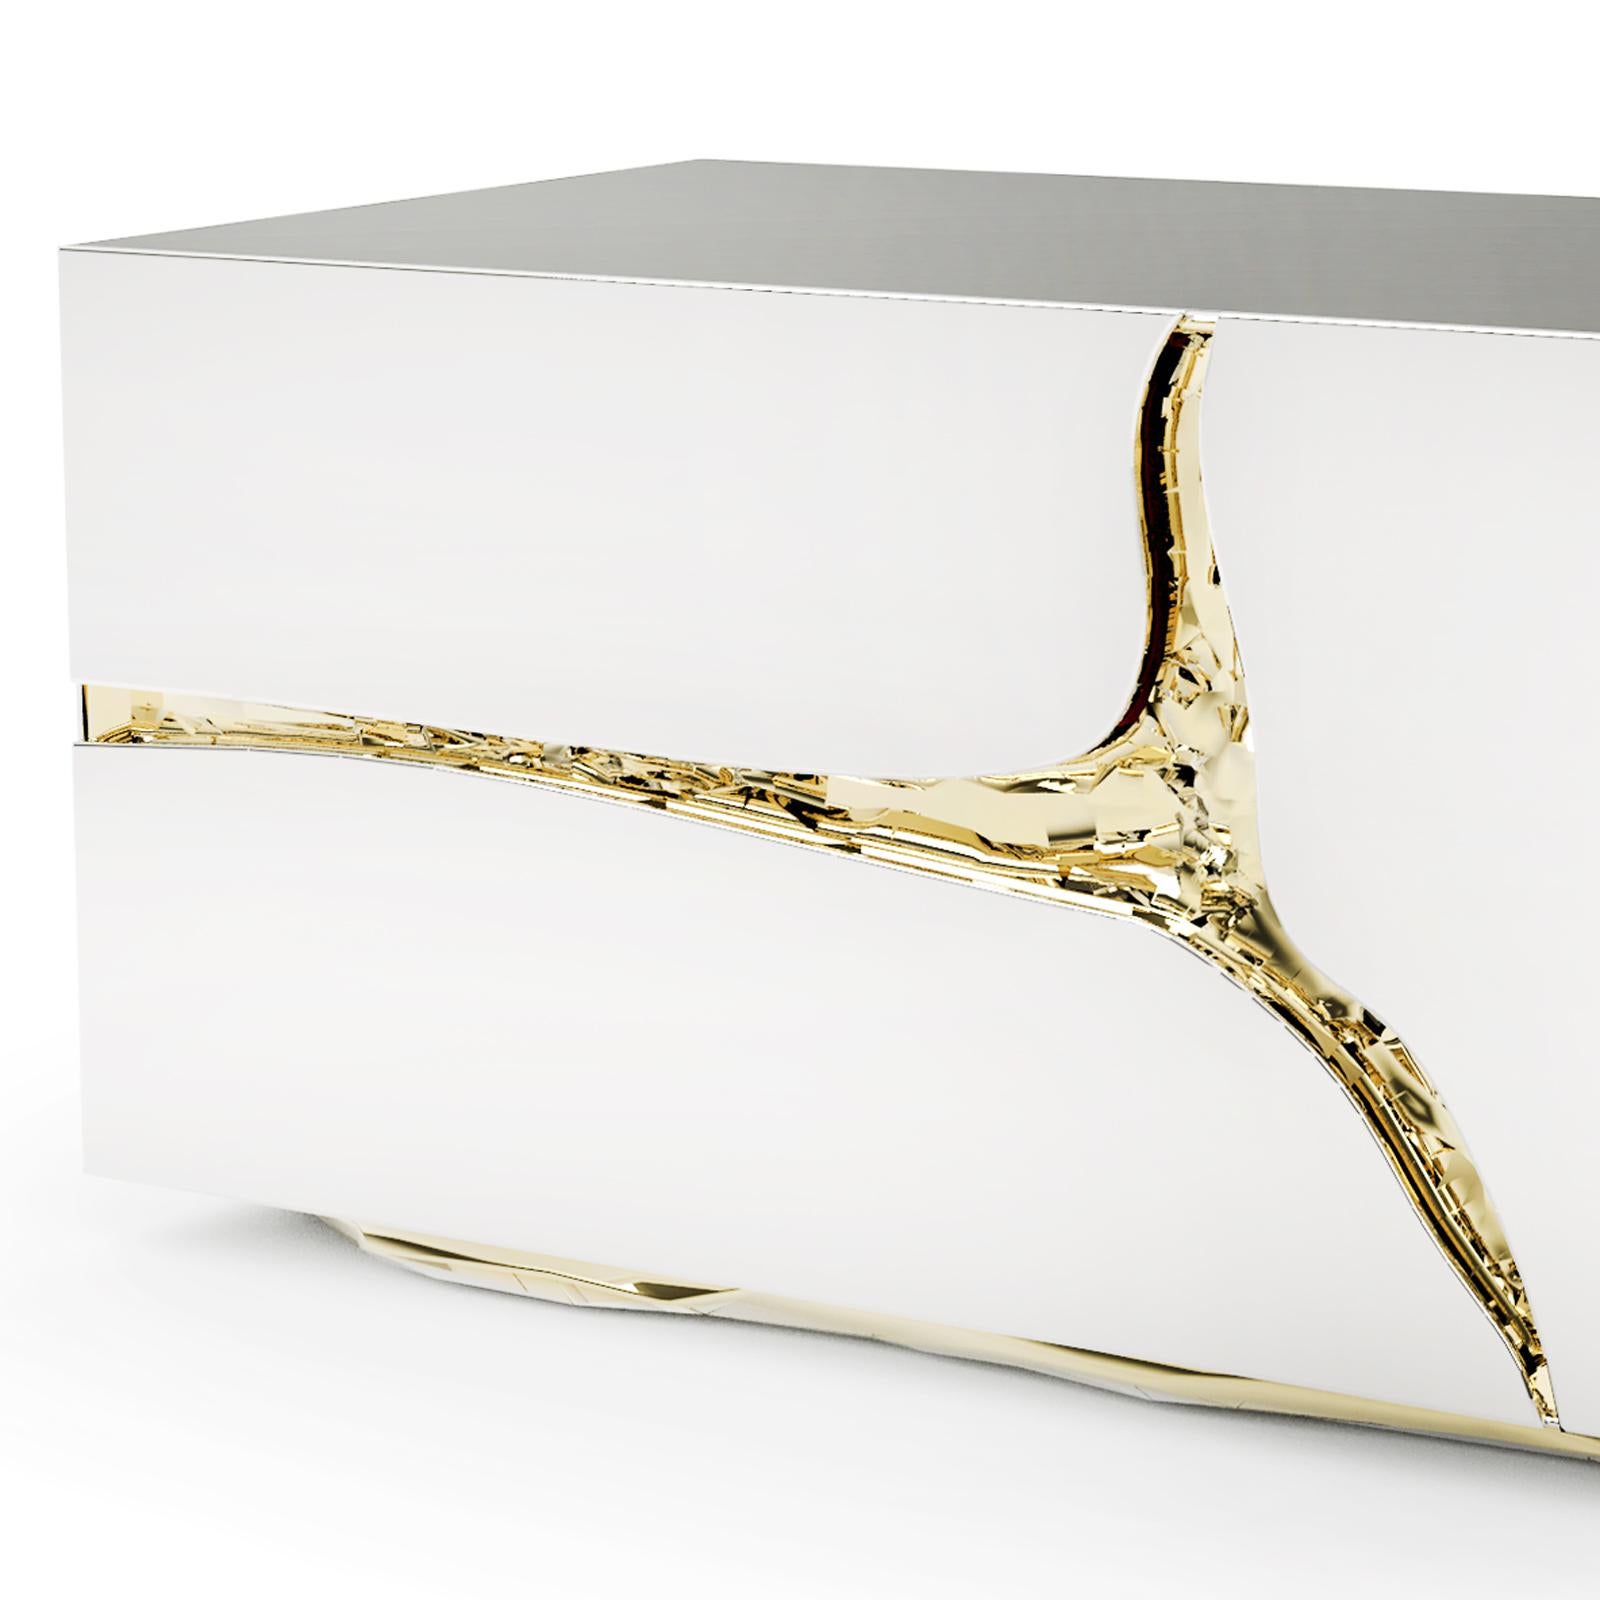 Nightstand or side table with poplar root veneer
structure inside and covered with polished stainless 
steel. With carved details in hammered brass. With
2 drawers and with blackened glass top.